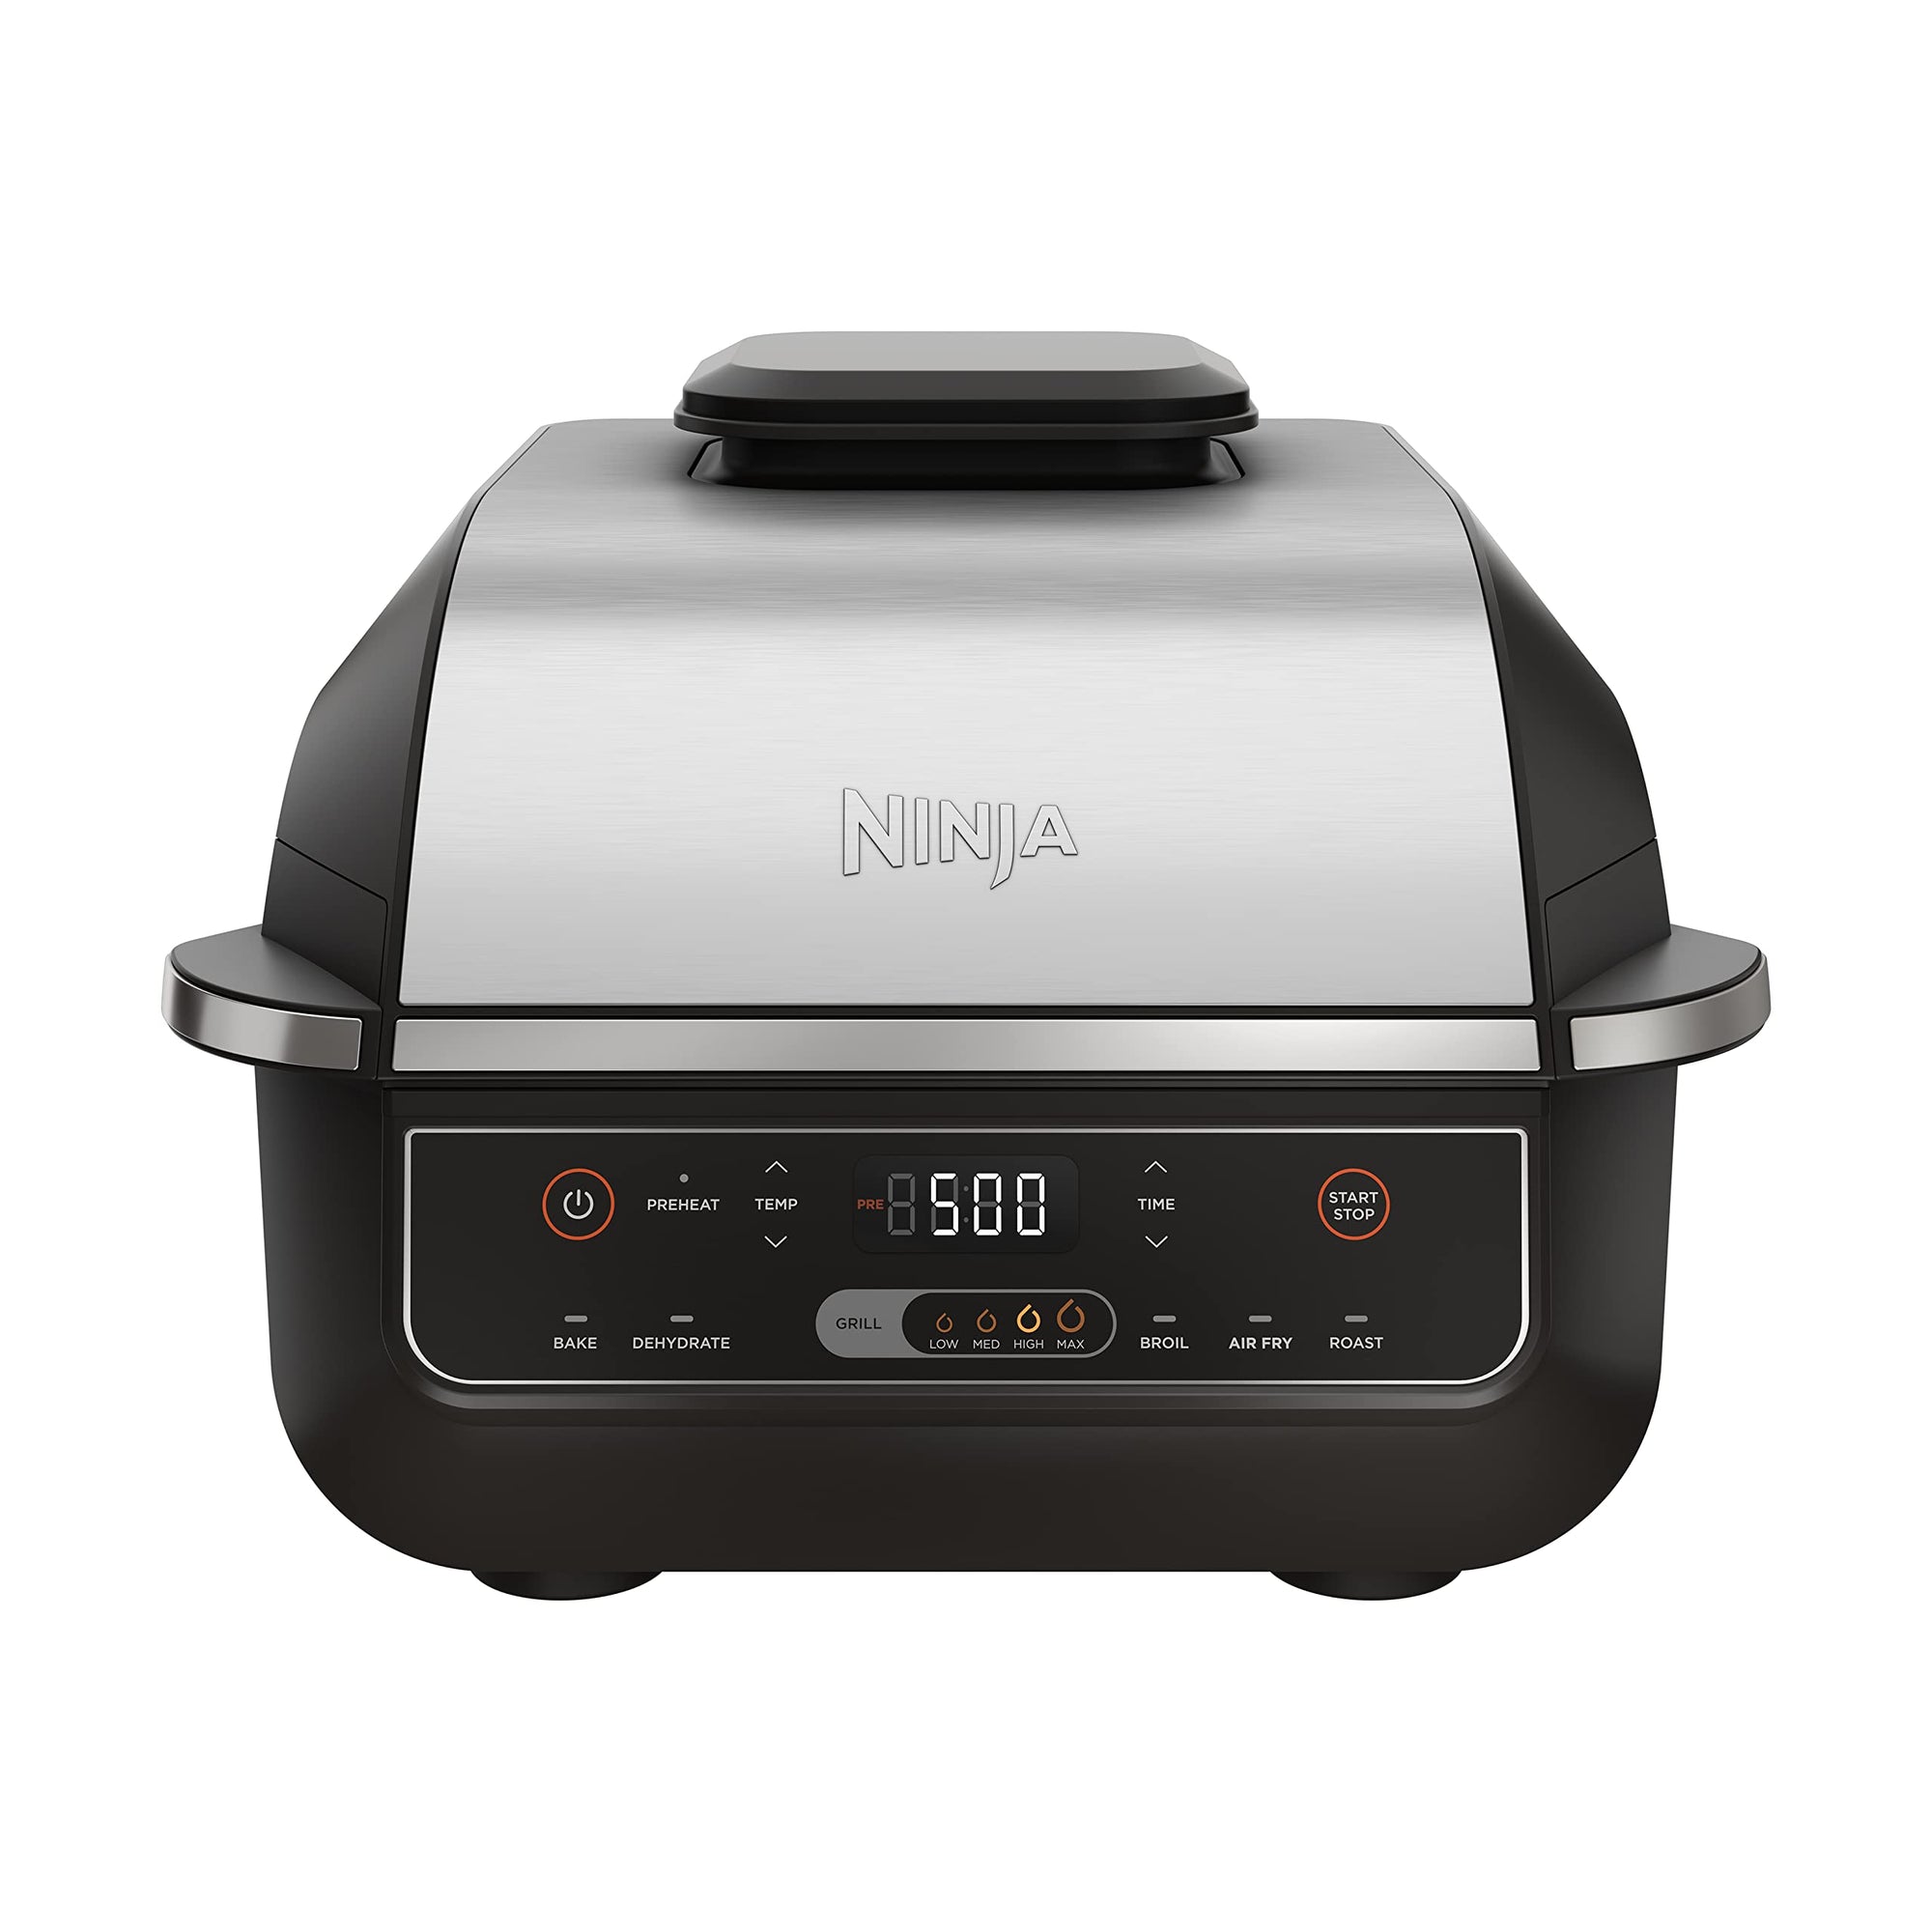 Ninja EG201 Foodi 6-in-1 Indoor Grill with Air Fry, Roast, Bake, Broil, & Dehydrate, 2nd Generation, Dishwasher Safe, Black/Silver